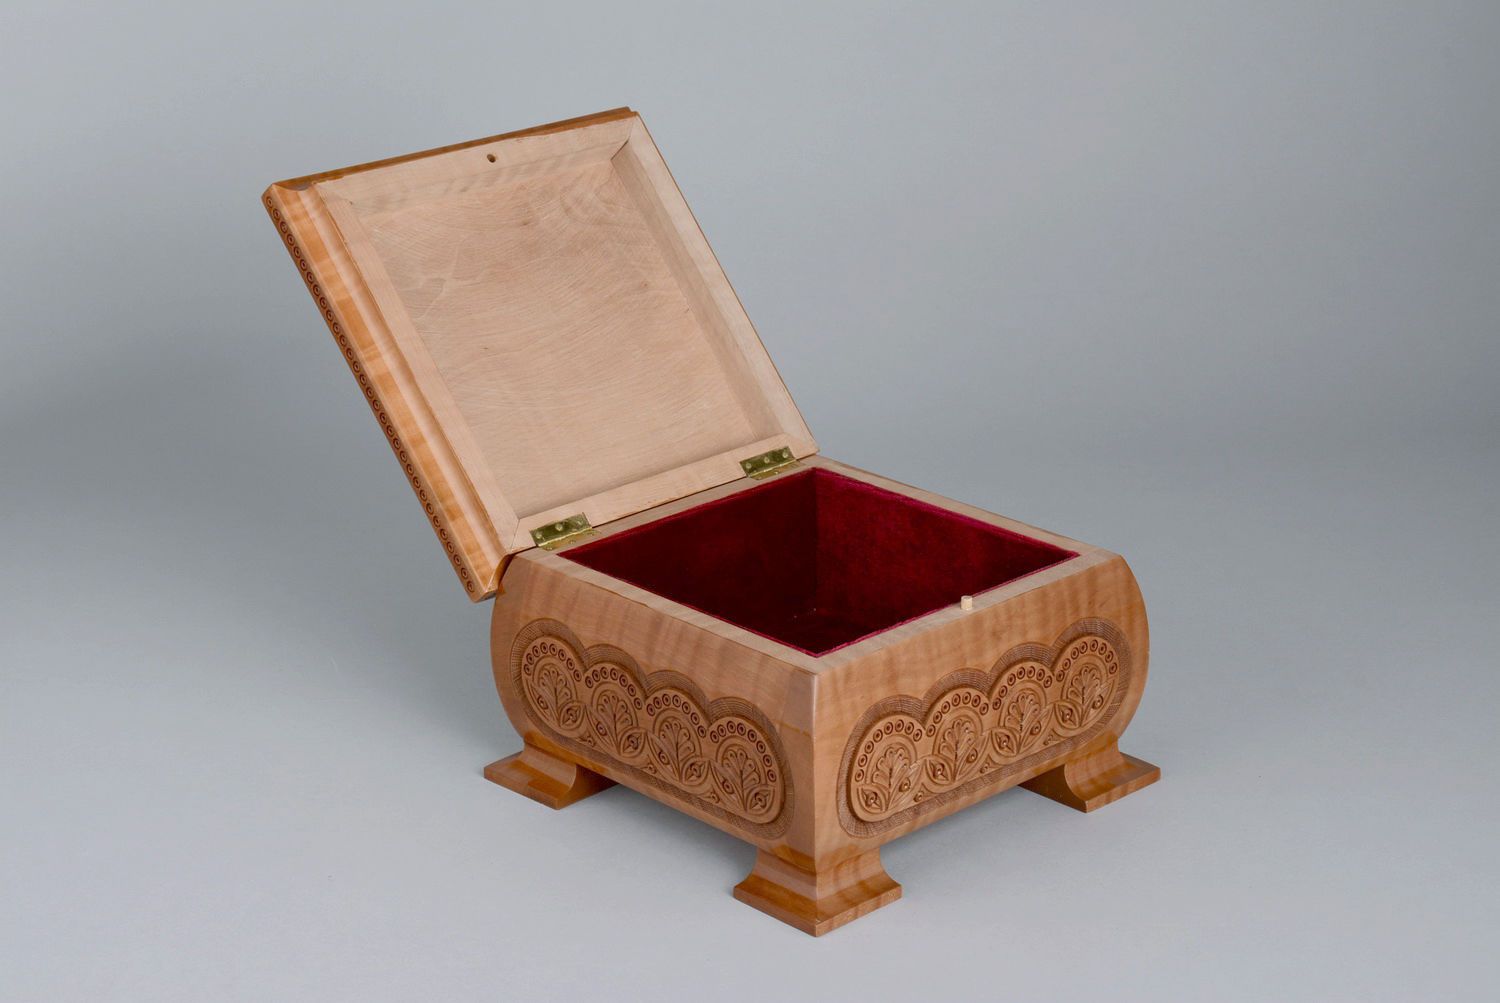 Wooden carved jewelry box photo 3